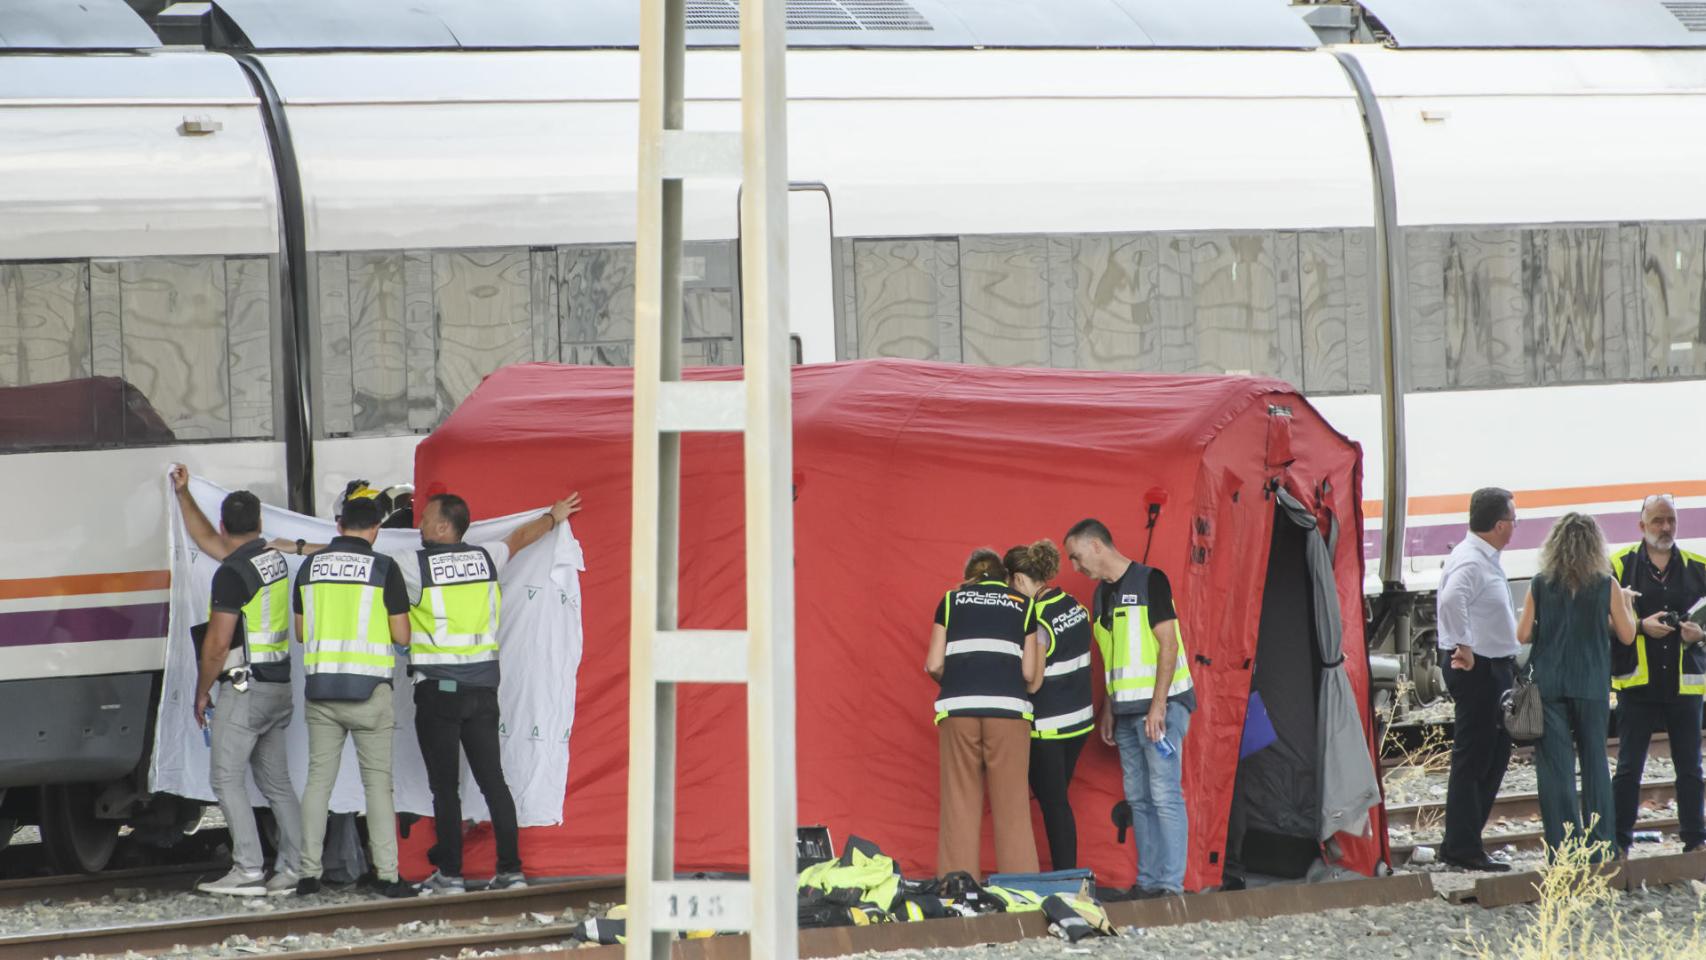 Álvaro Prieto died electrocuted between the train cars, according to the autopsy